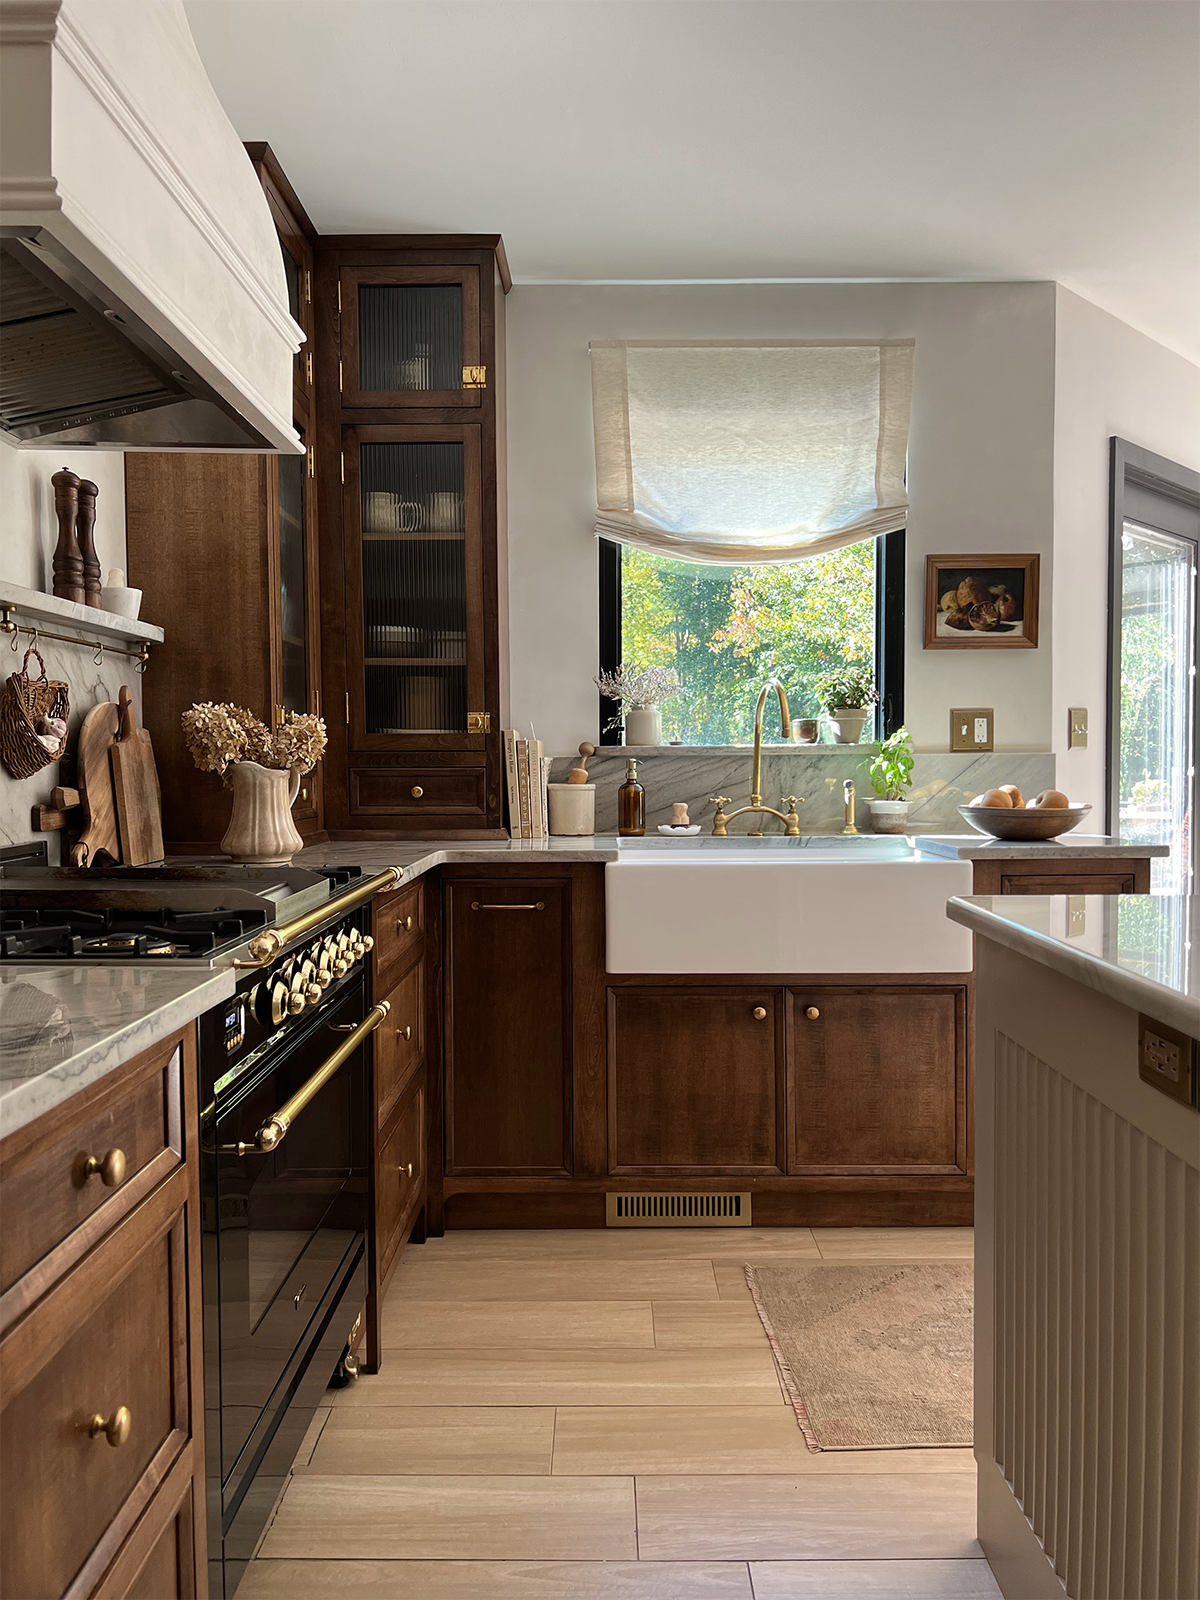 Relaxed Roman Shade in Kitchen with Wood Cabinets